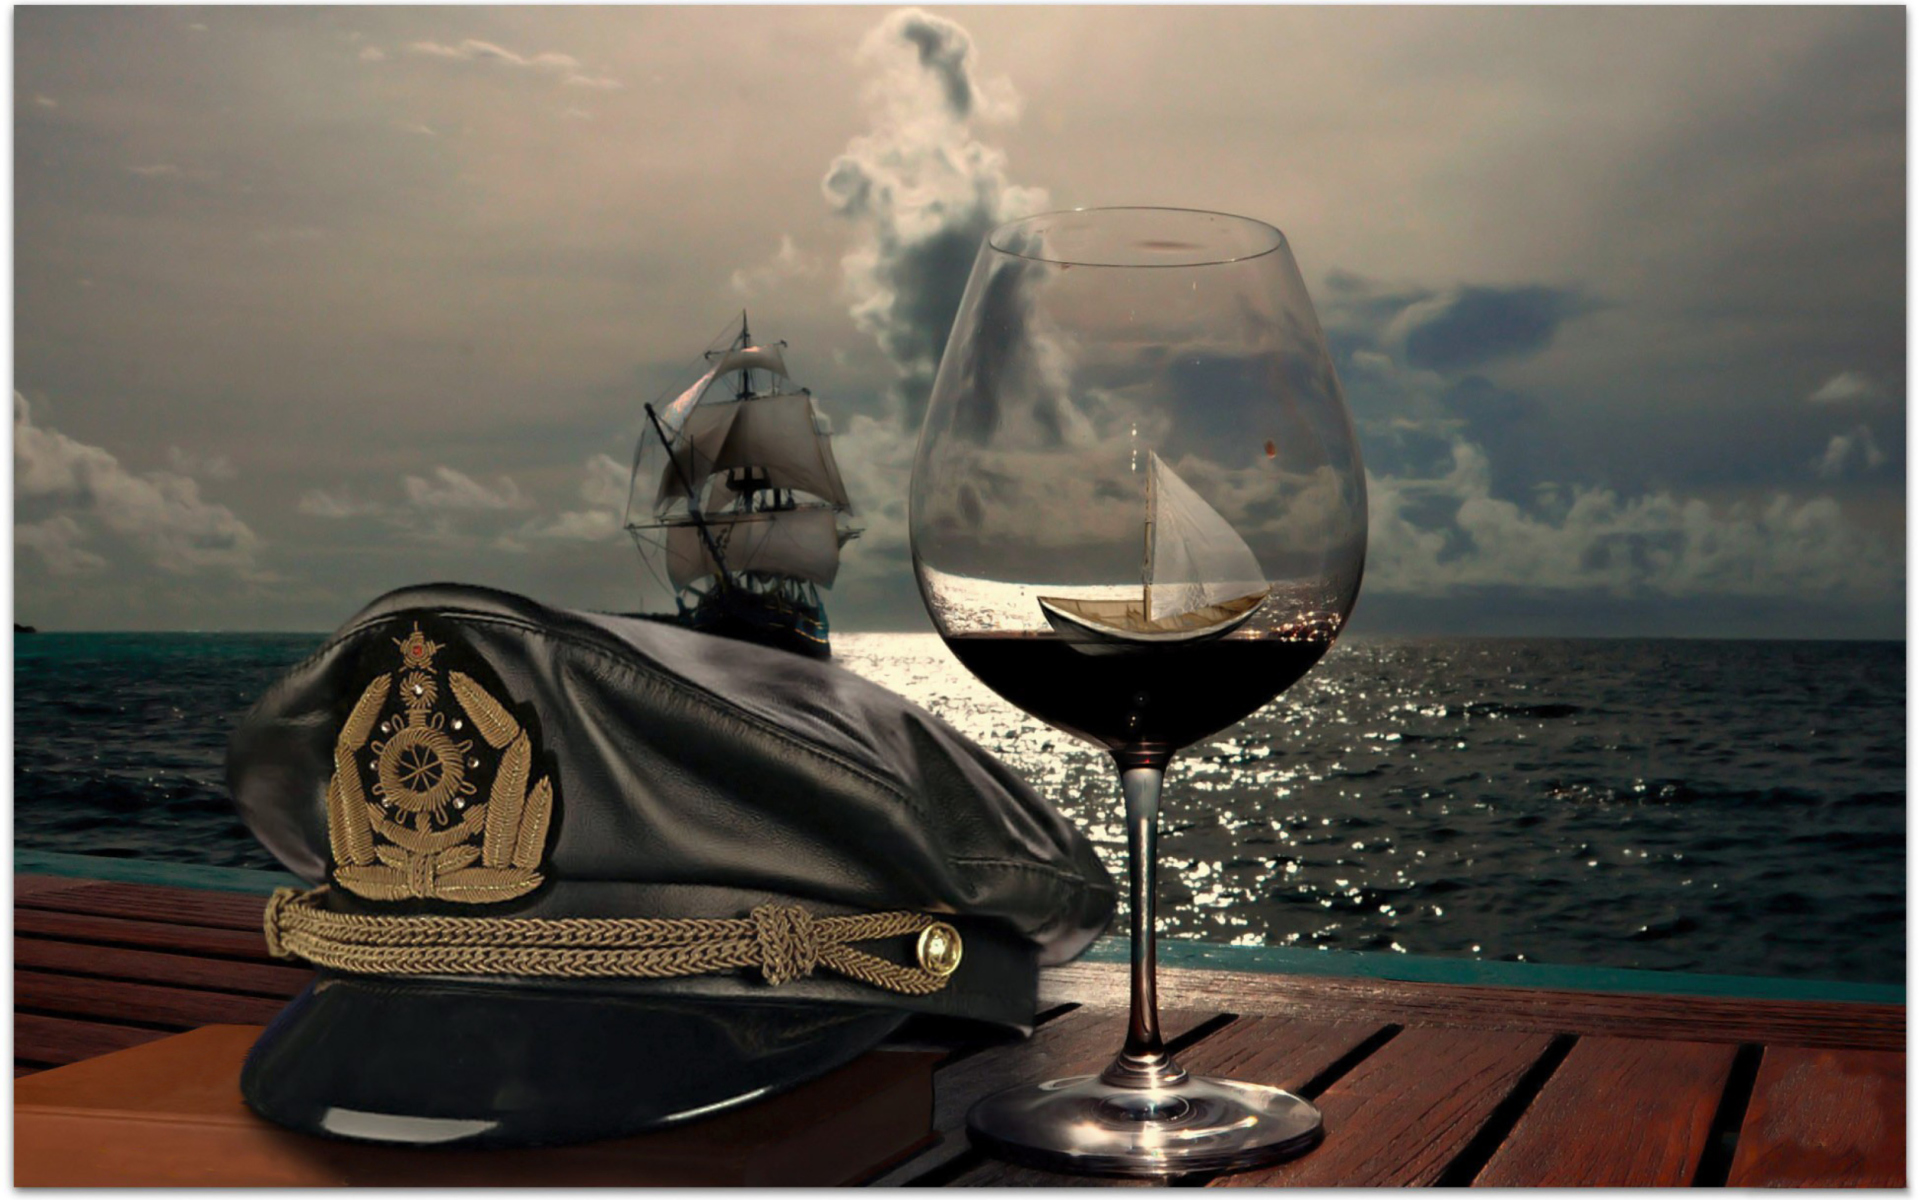 Ships In Sea And In Wine Glass wallpaper 1920x1200